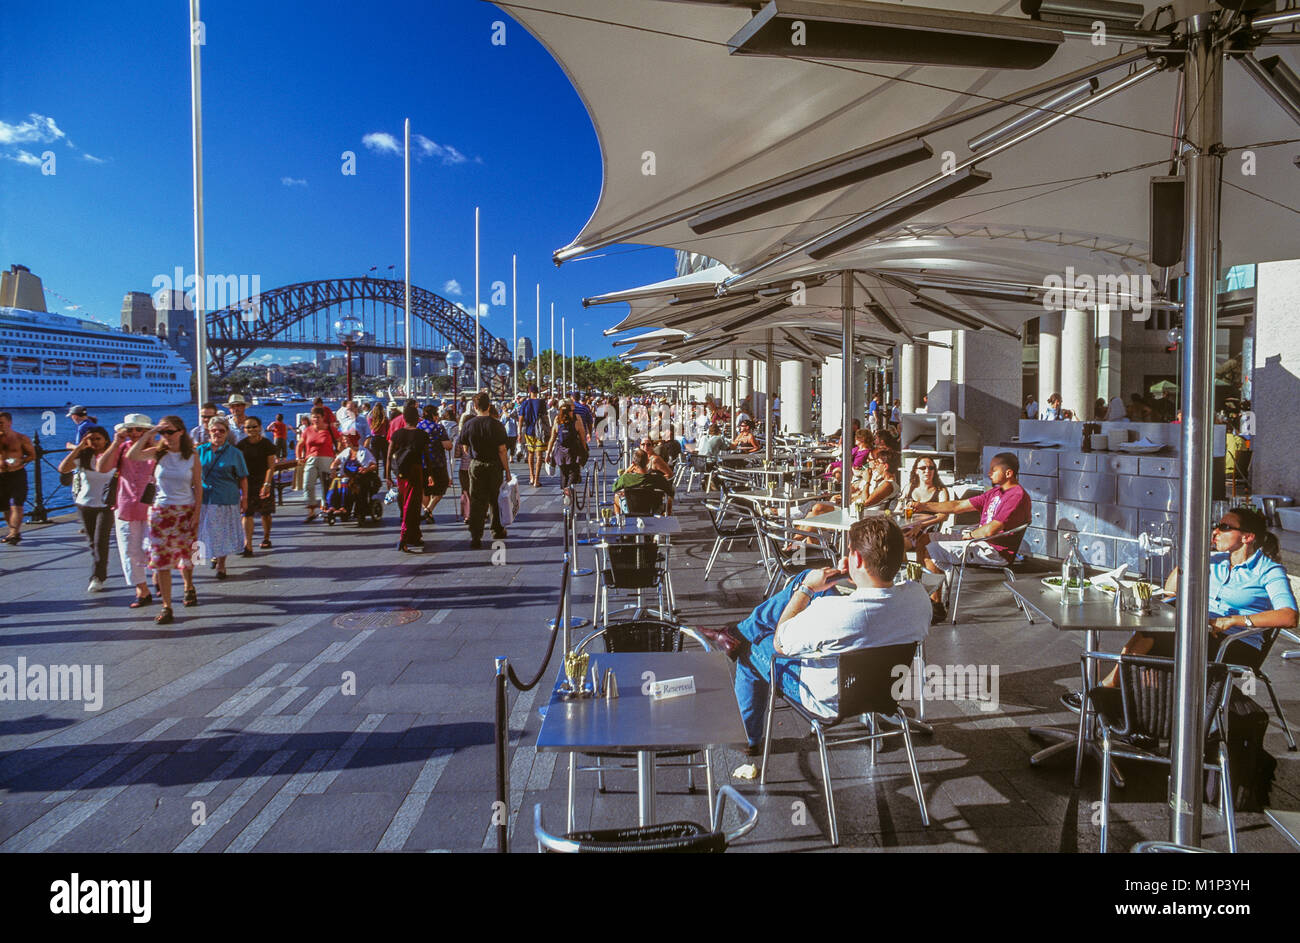 The Opera Quays boardwalk leading to Sydney Opera House at Circular Quay East along the Bennelong Apartments 'Toaster Building' promenade. Stock Photo